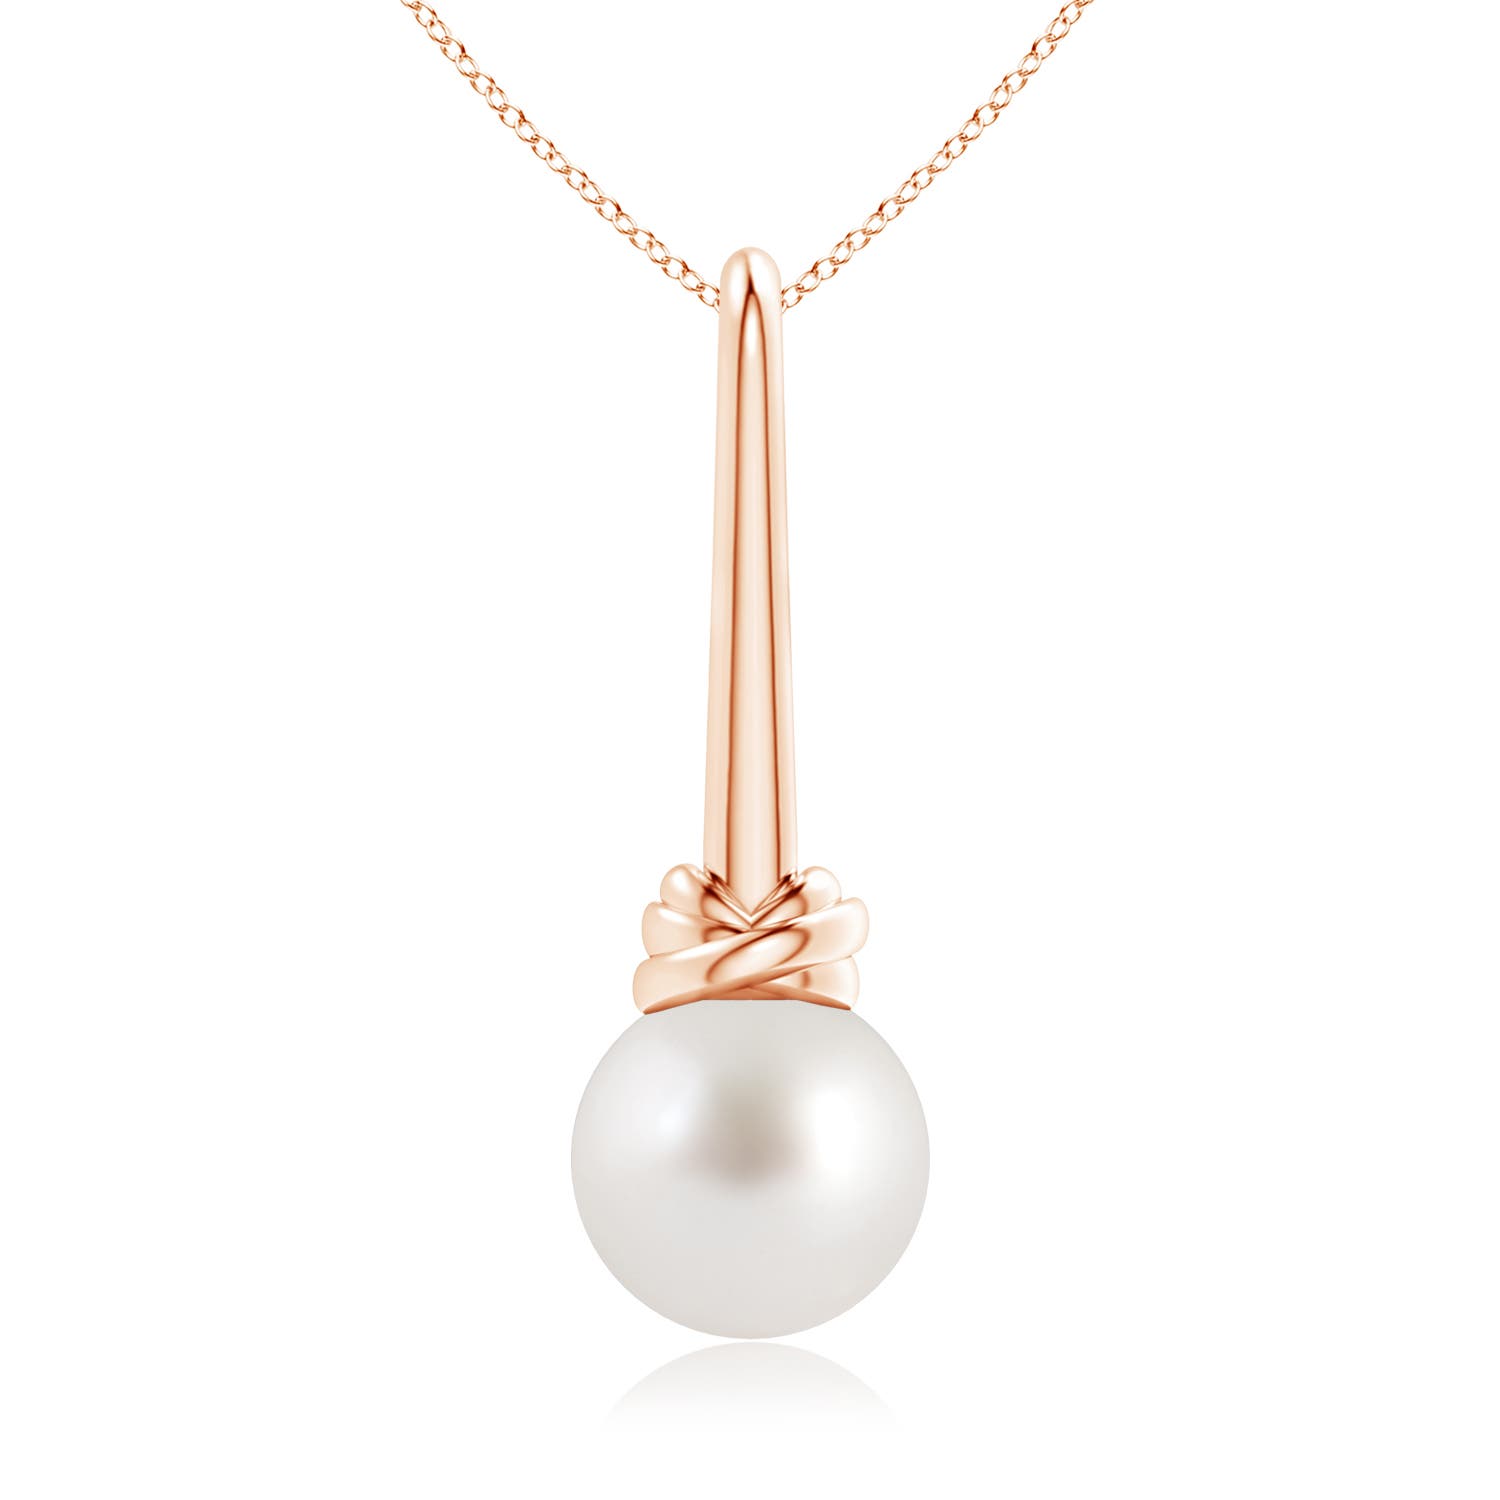 AAA - South Sea Cultured Pearl / 7.2 CT / 14 KT Rose Gold